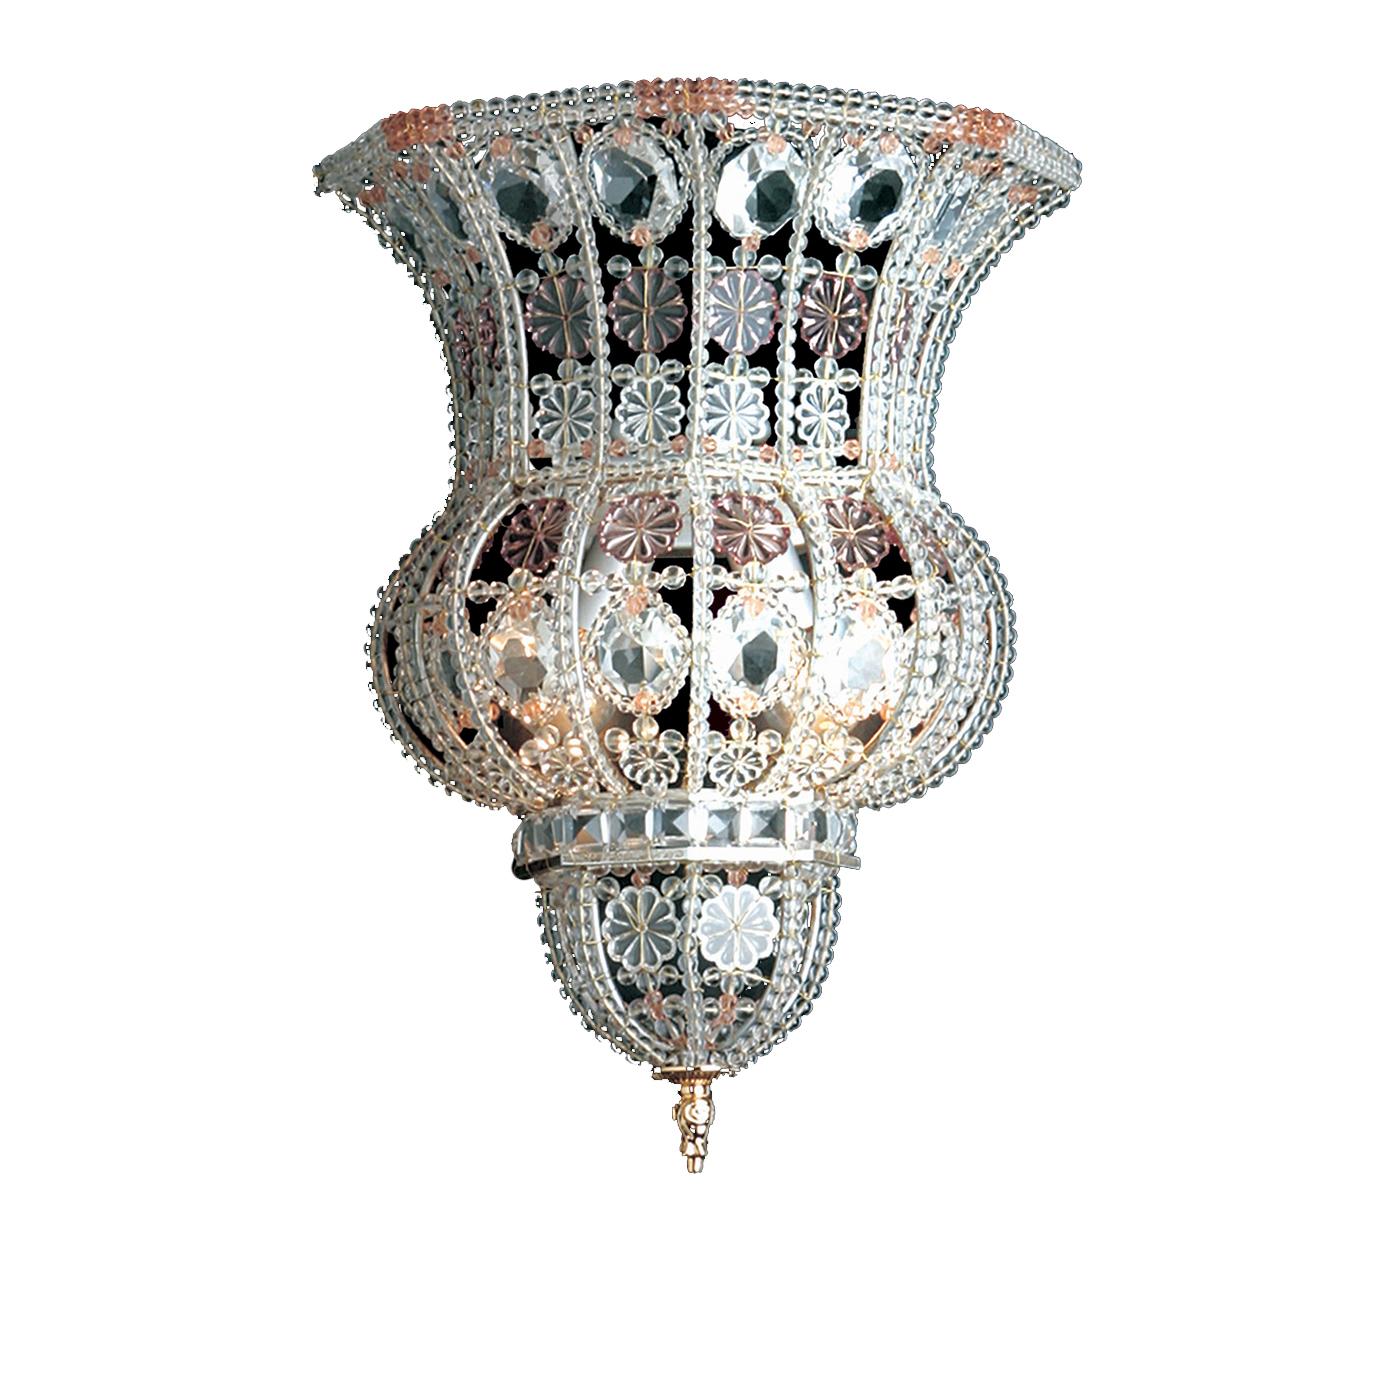 A sinuous silhouette and mesmerizing decorations make this sconce a superb addition to any home. Either in an entryway, powder room, or bedroom, this sparkling piece will make a sophisticated statement. Its forged-iron structure creates delicate